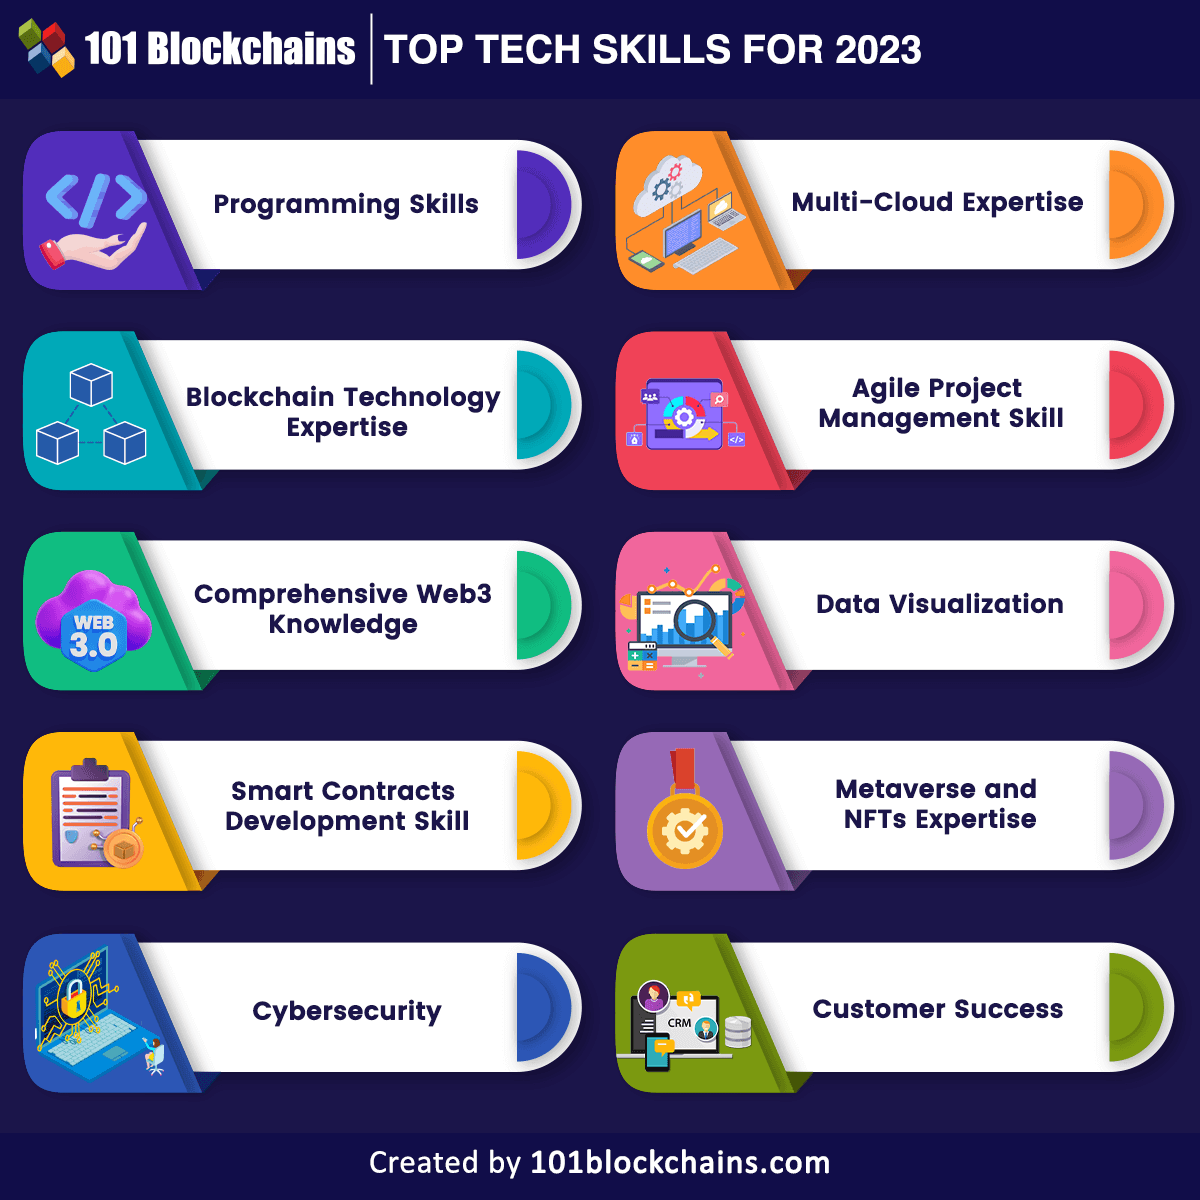 Top Tech Skills for 2023